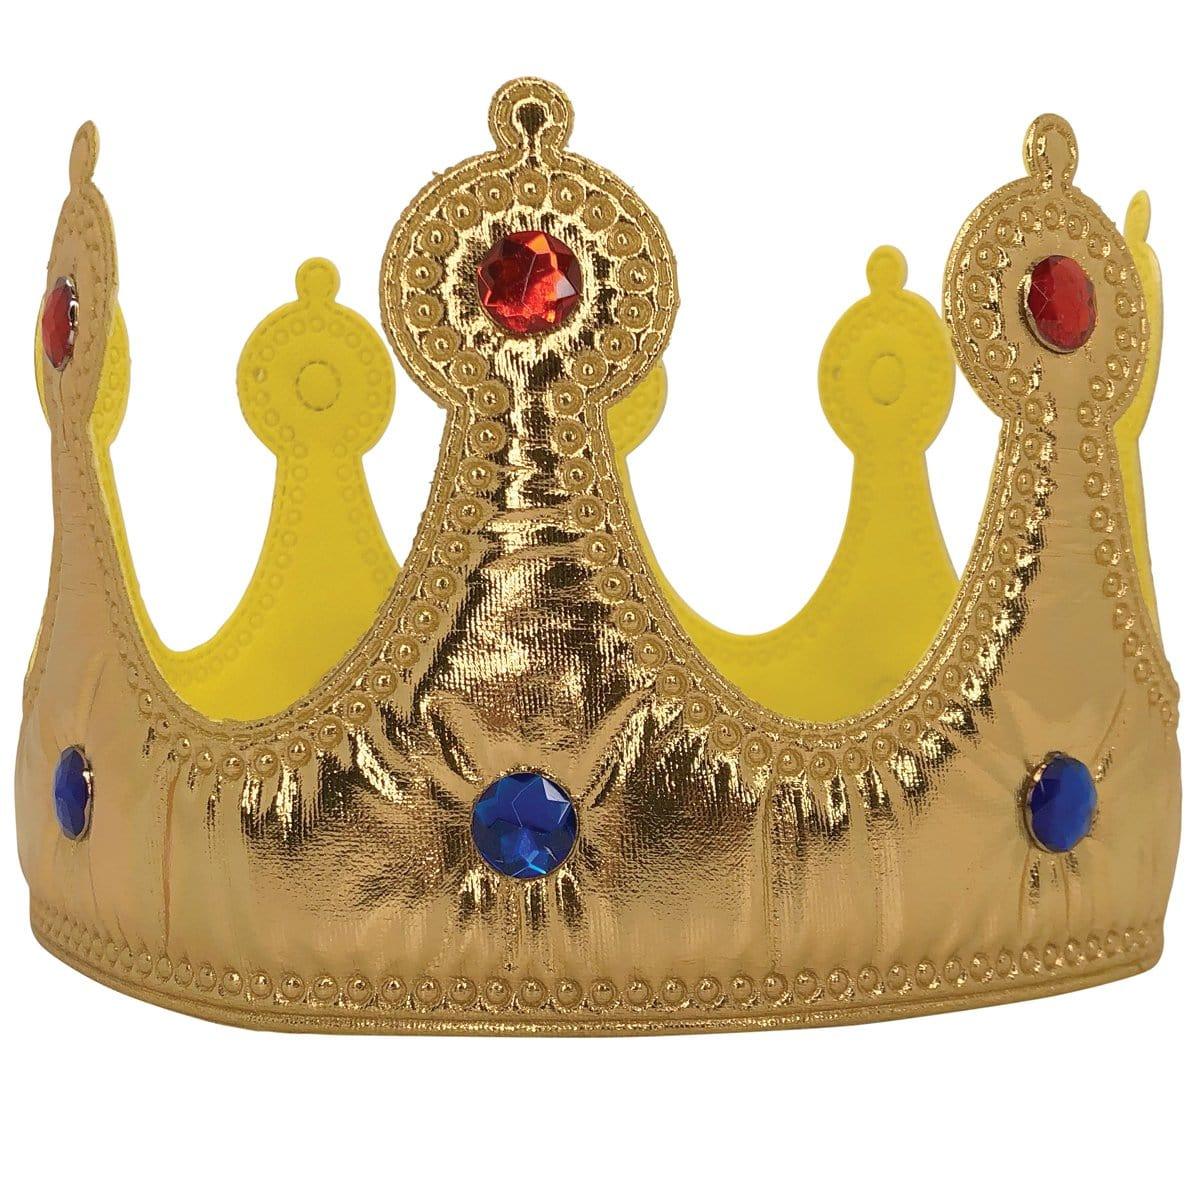 Buy Costume Accessories Gold crown for kids sold at Party Expert